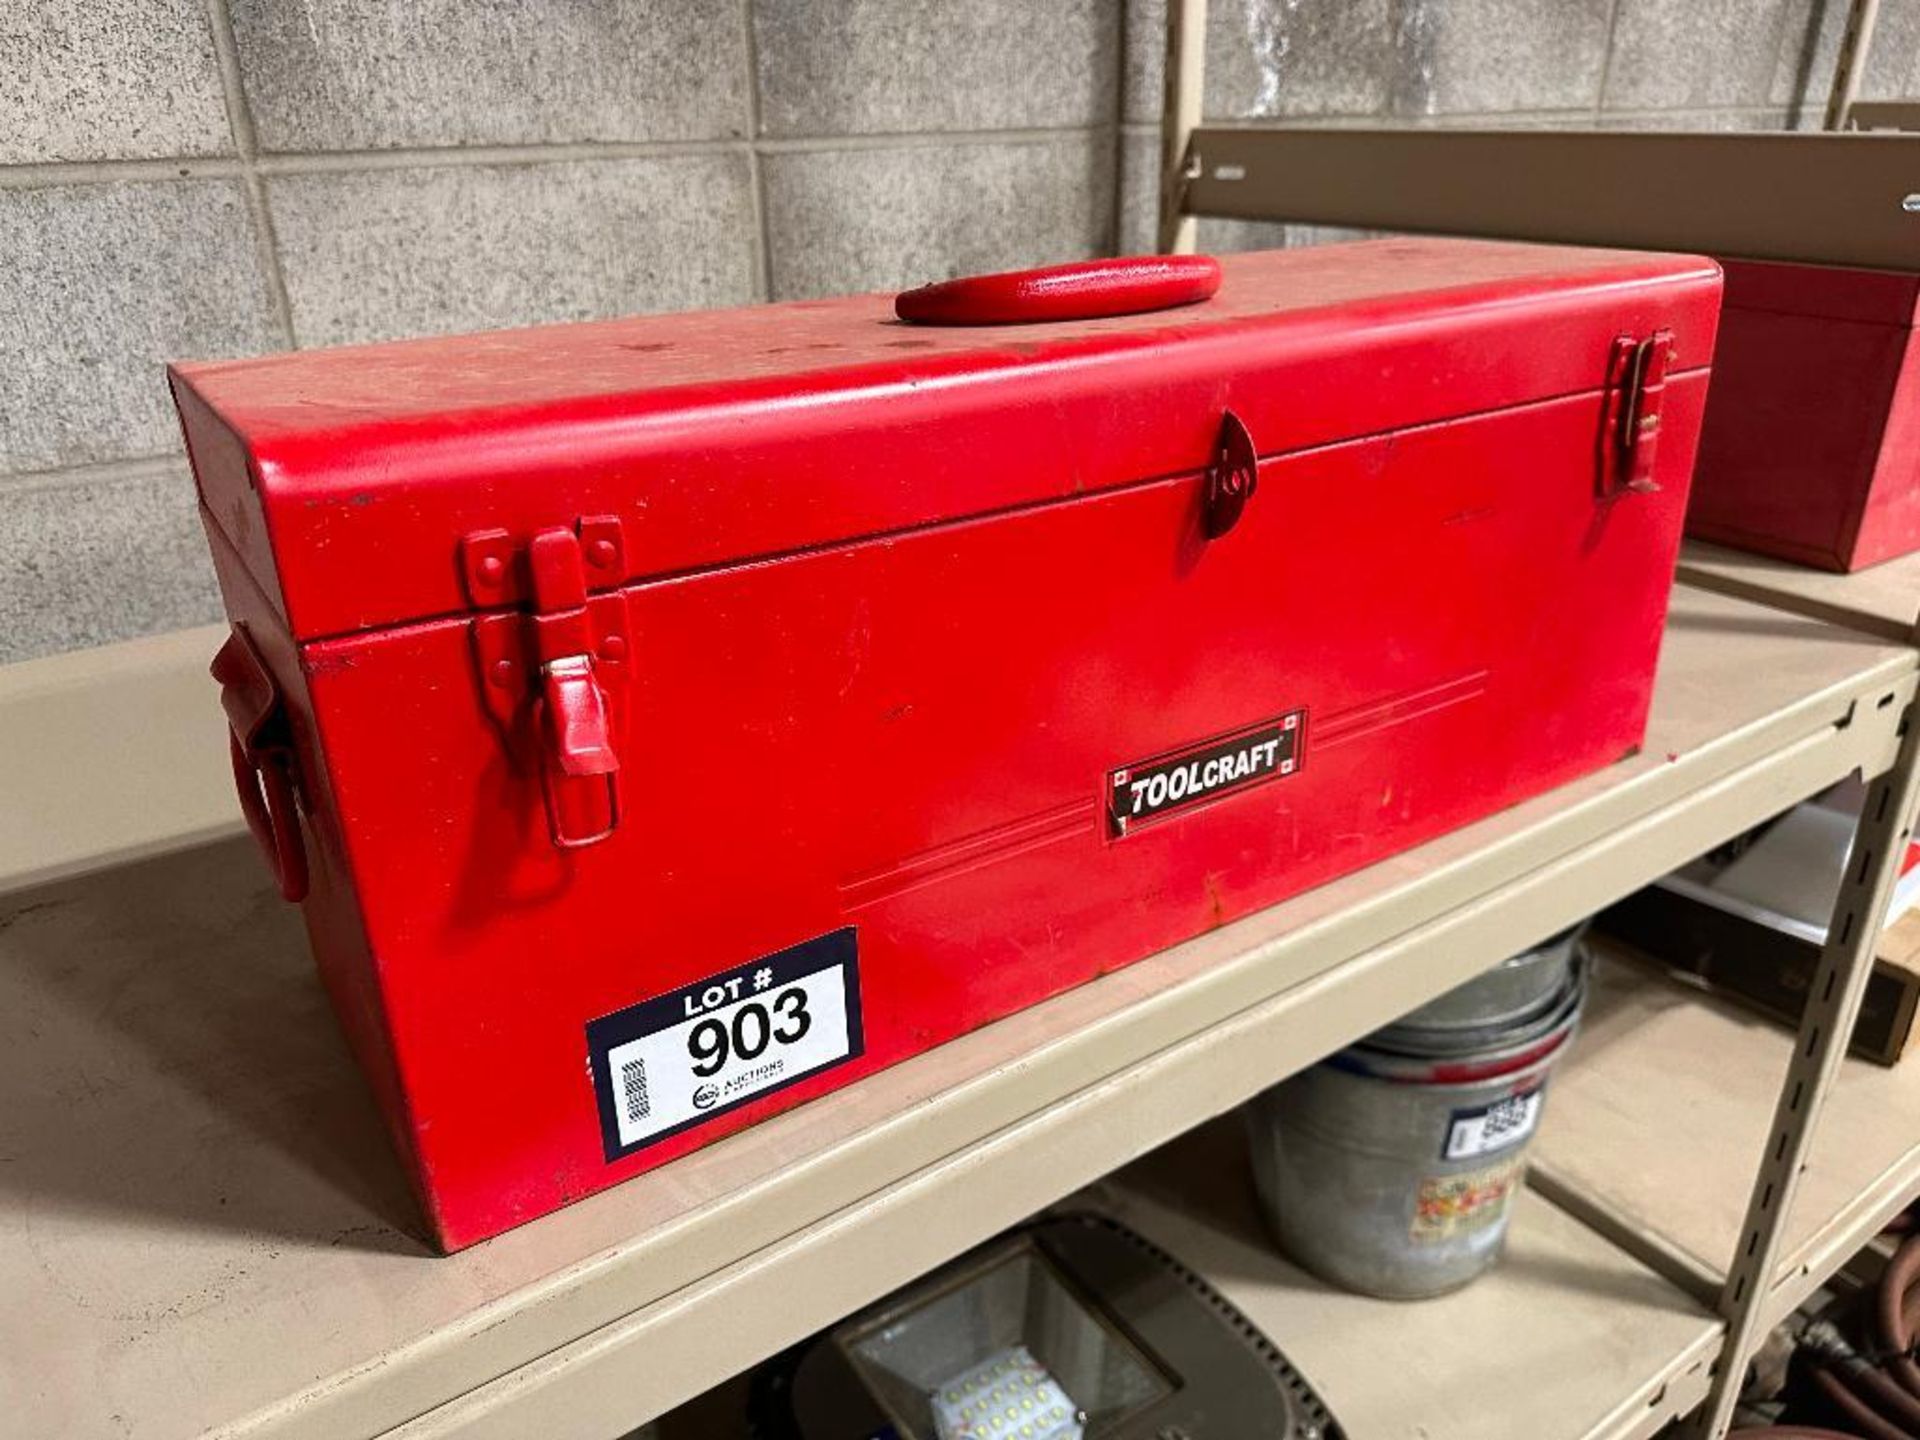 Toolcraft Red Tool Box - Image 2 of 3